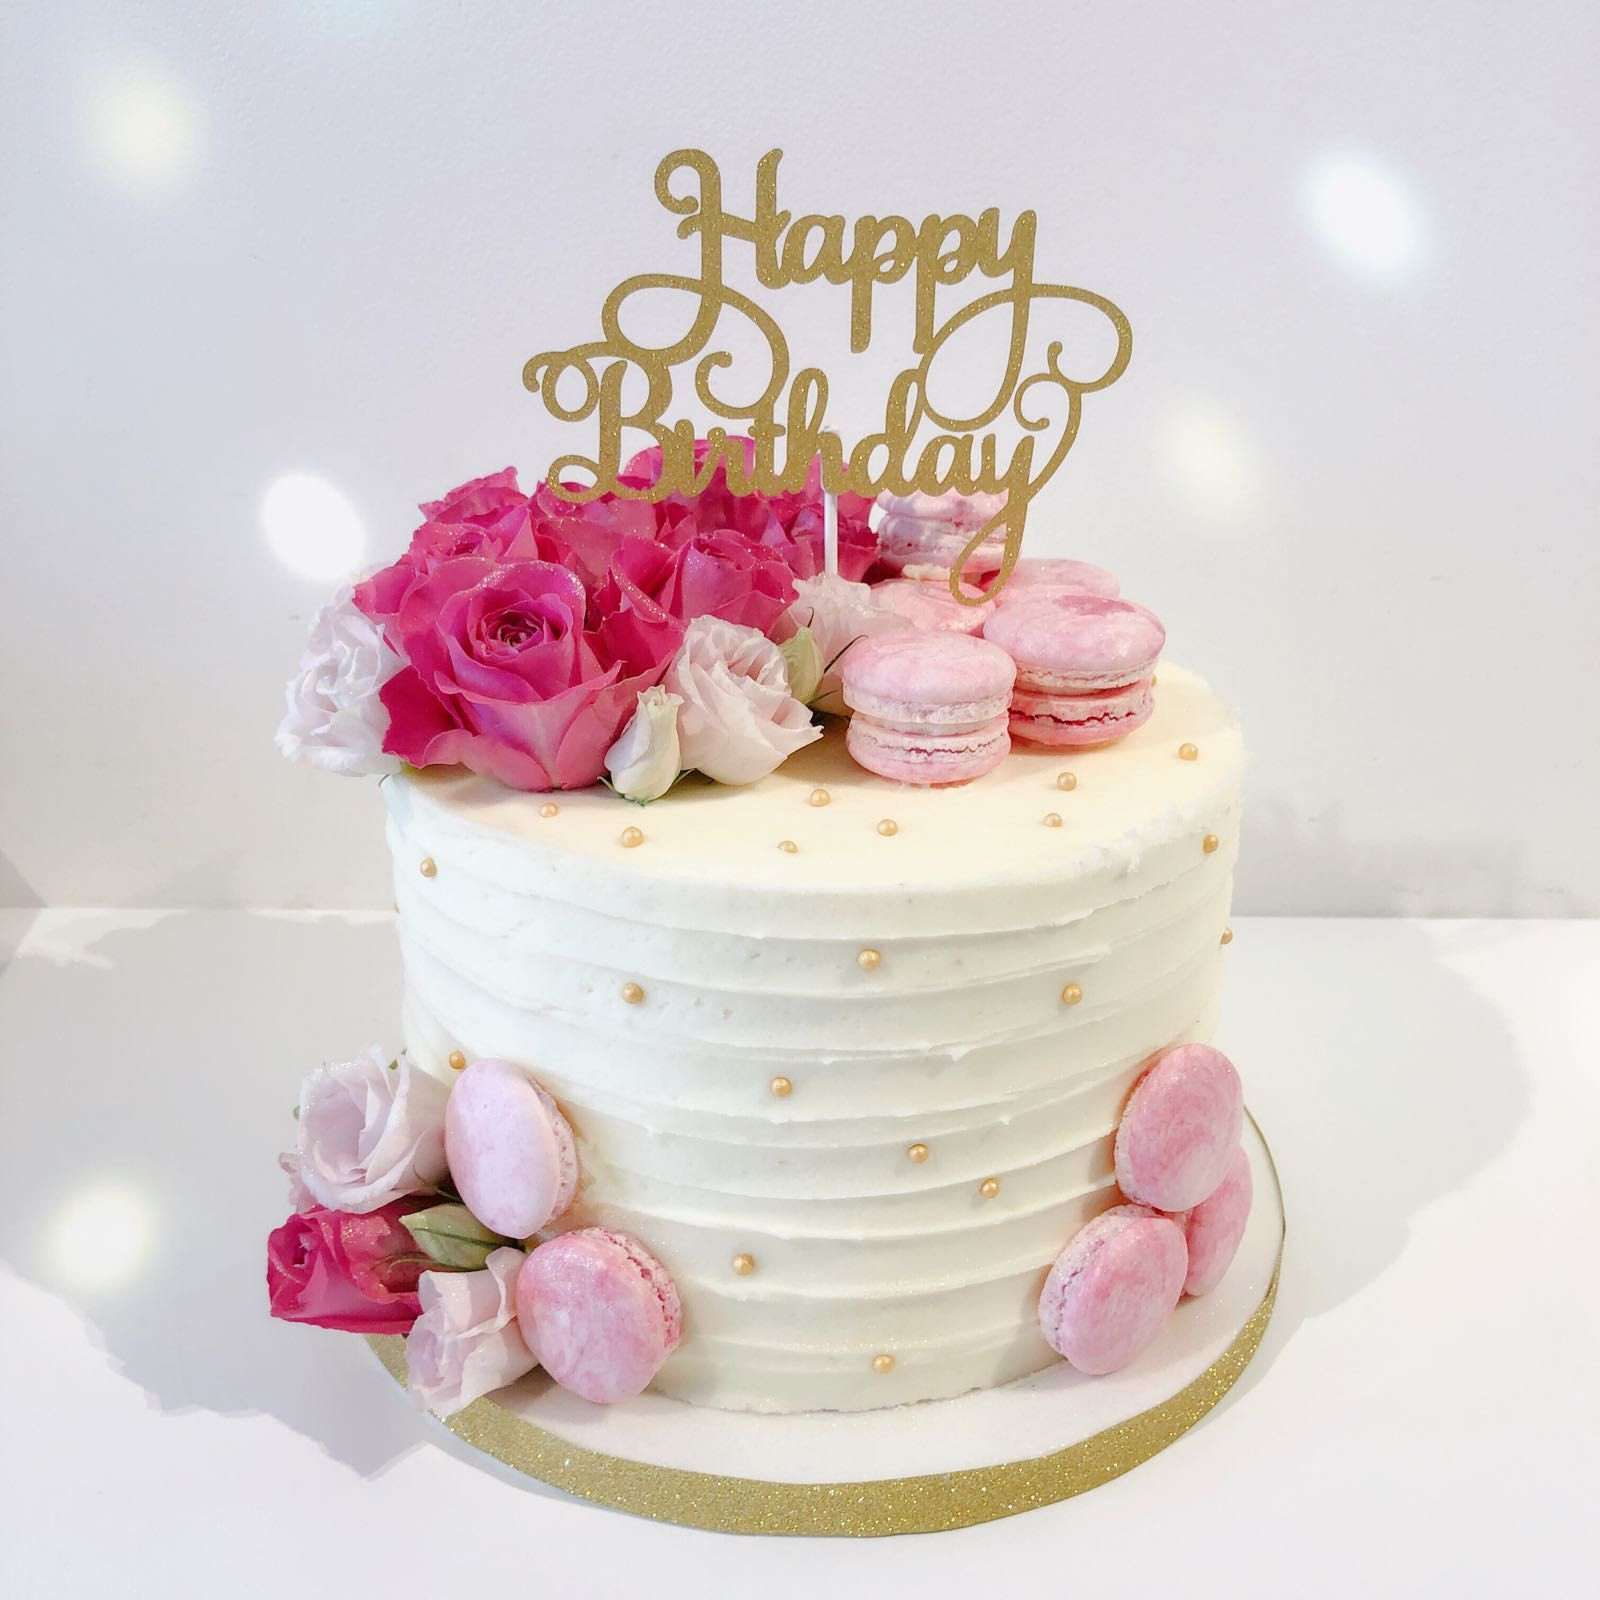 Pictures Of Beautiful Birthday Cakes
 25 The most beautiful birthday cake pictures 2020